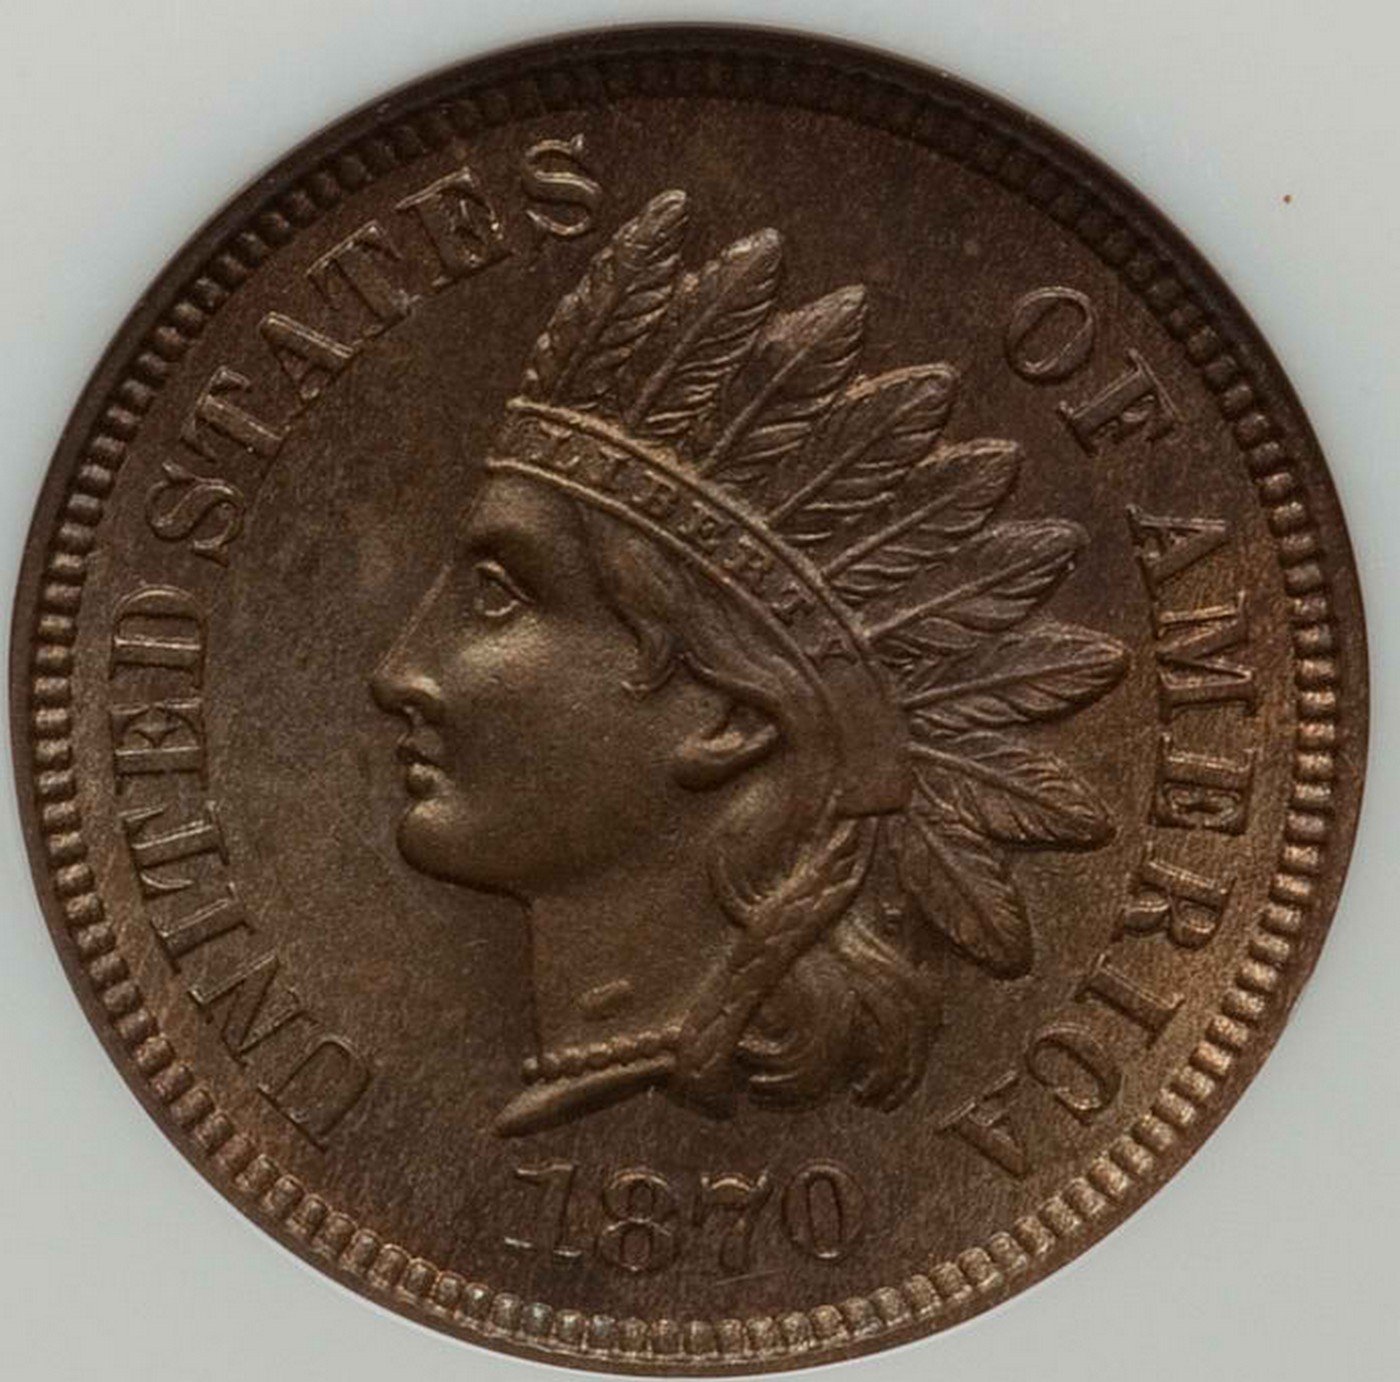 1870 DDR-017 Indian Head Penny - Photos courtesy of Heritage Auctions